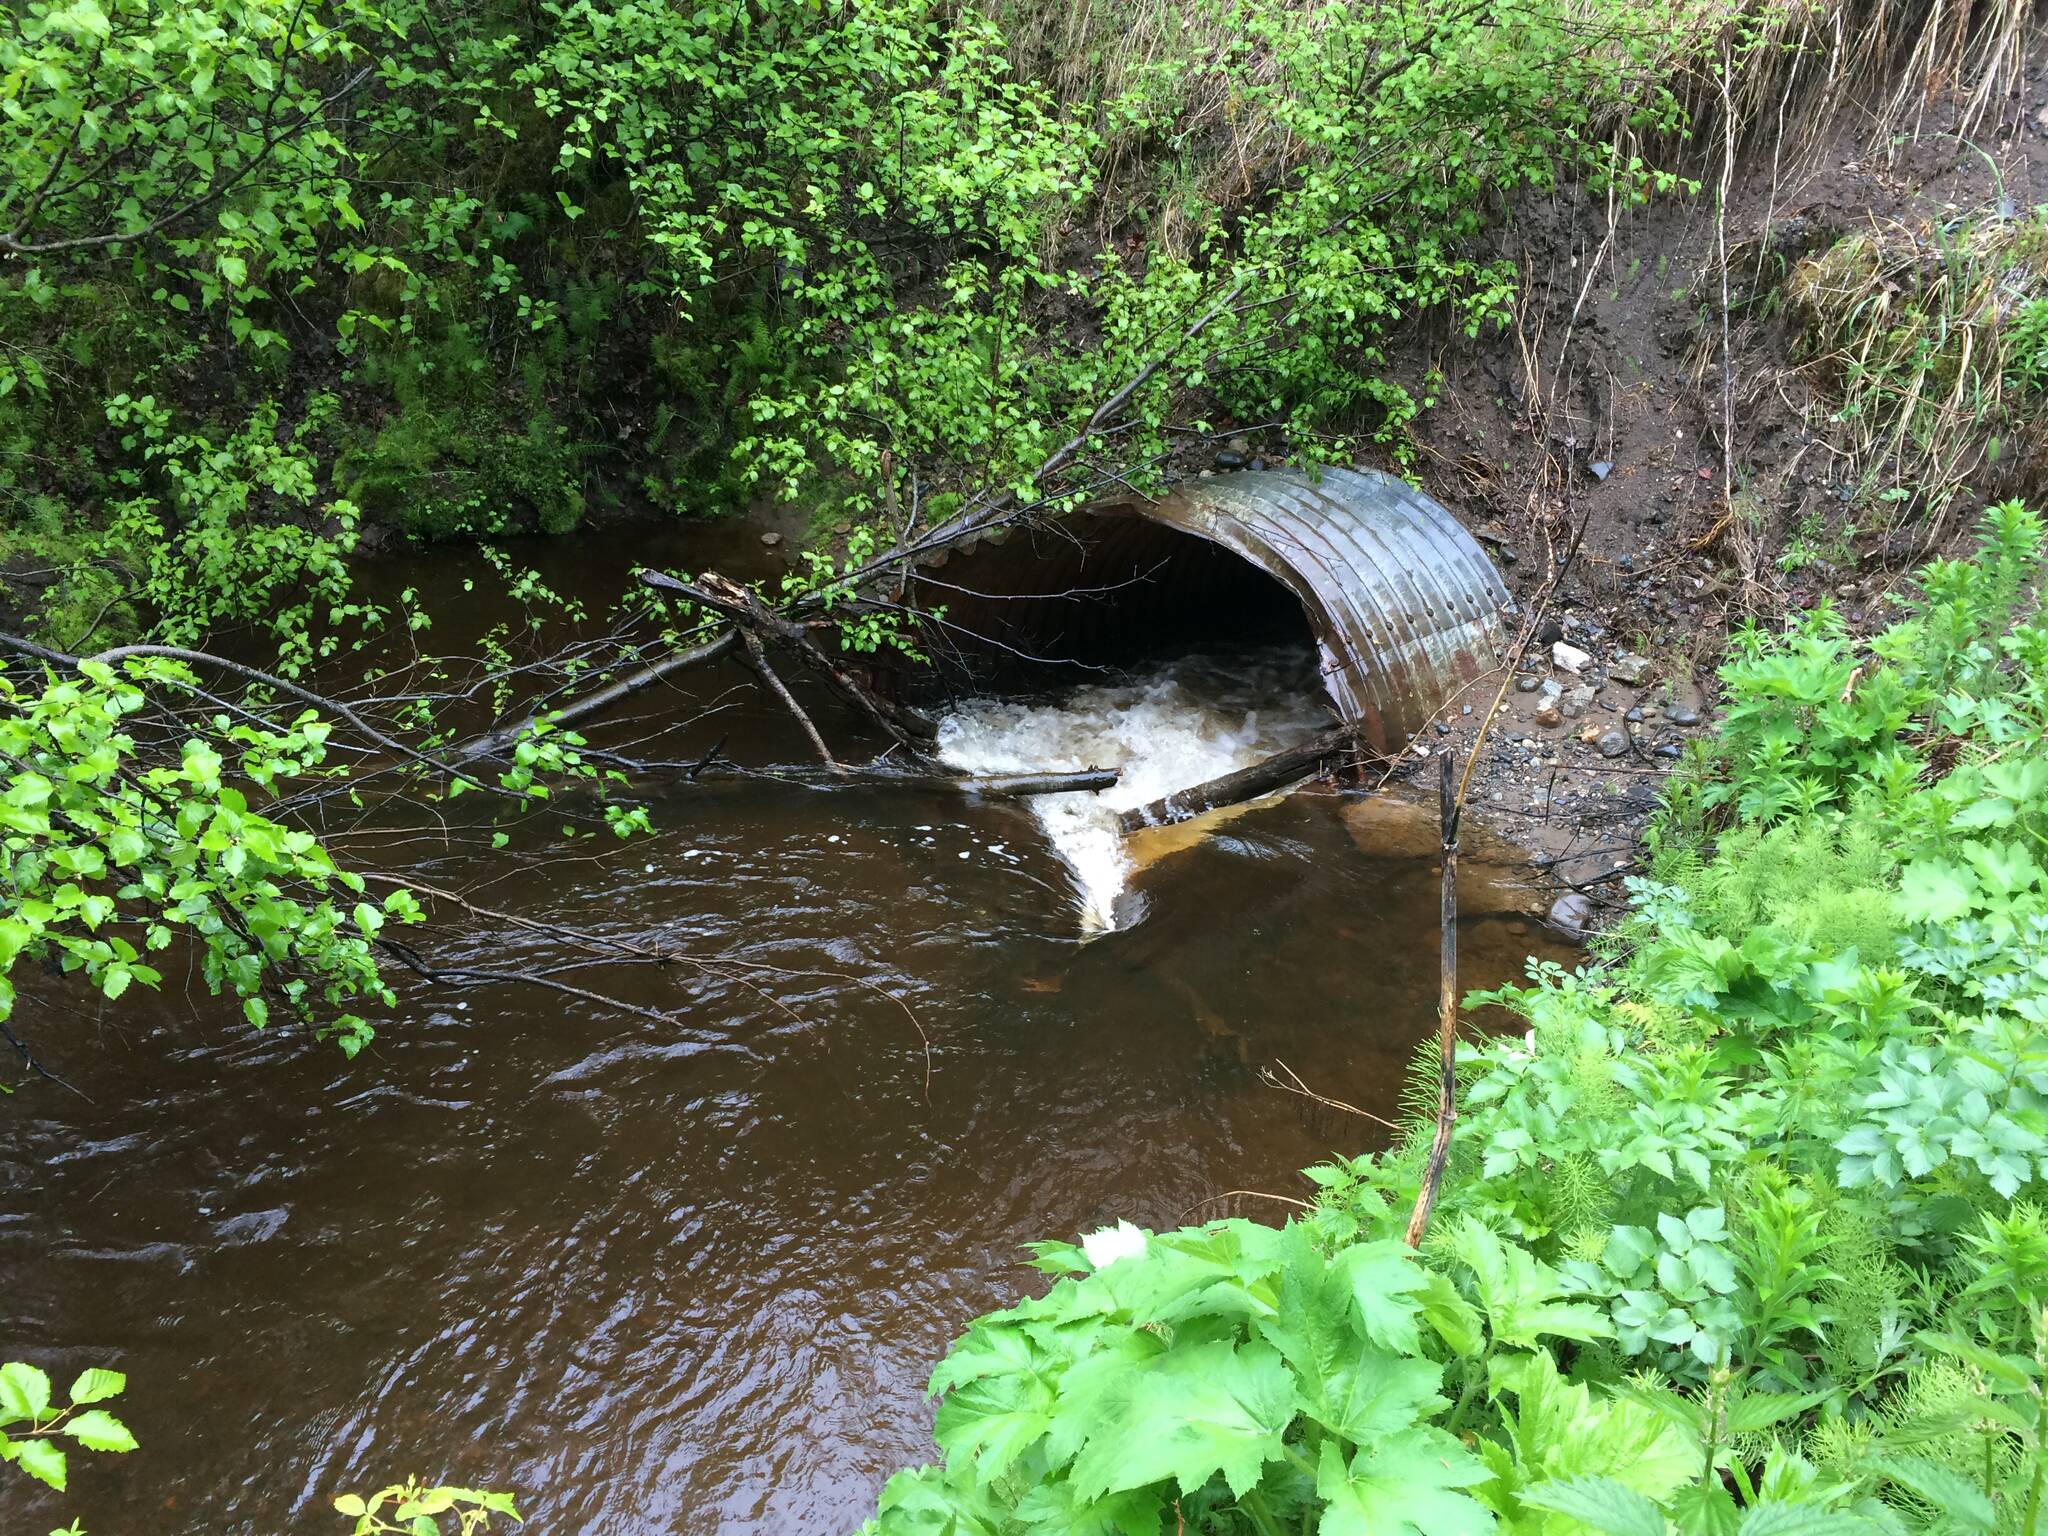 The culvert at Lower Tyonek Creek is obstructed by debris in this undated photo. (Photo courtesy Dr. Laurie Stuart)